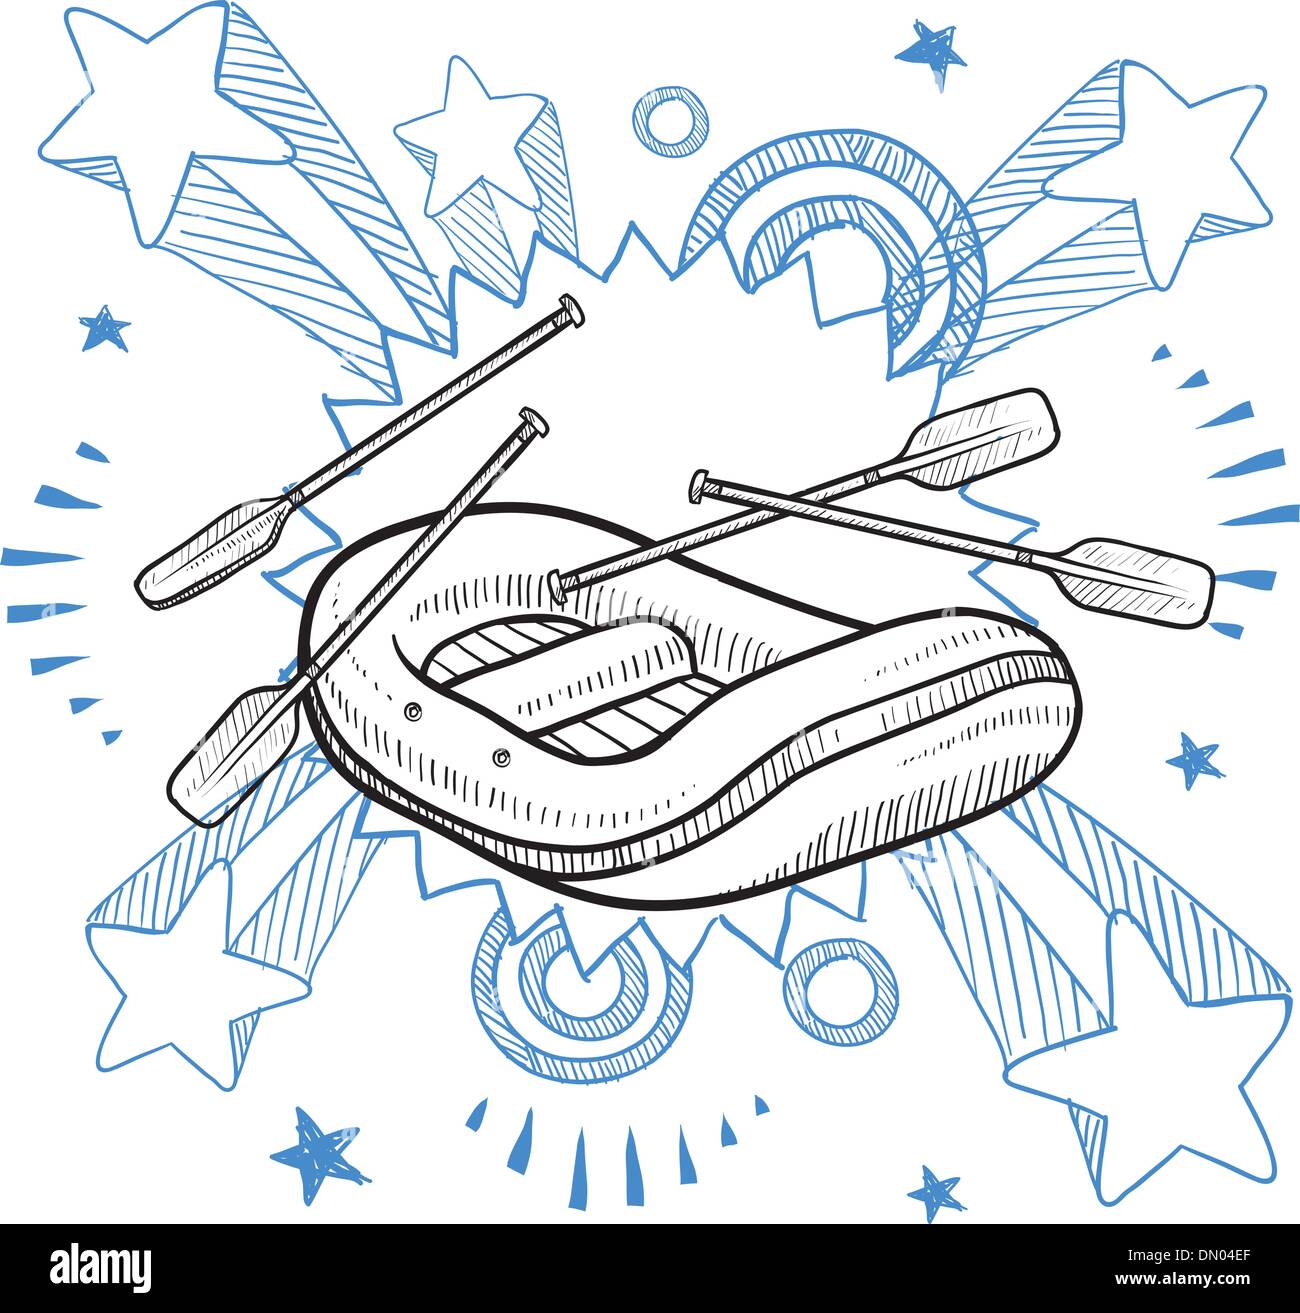 Whitewater rafting vector sketch Stock Vector